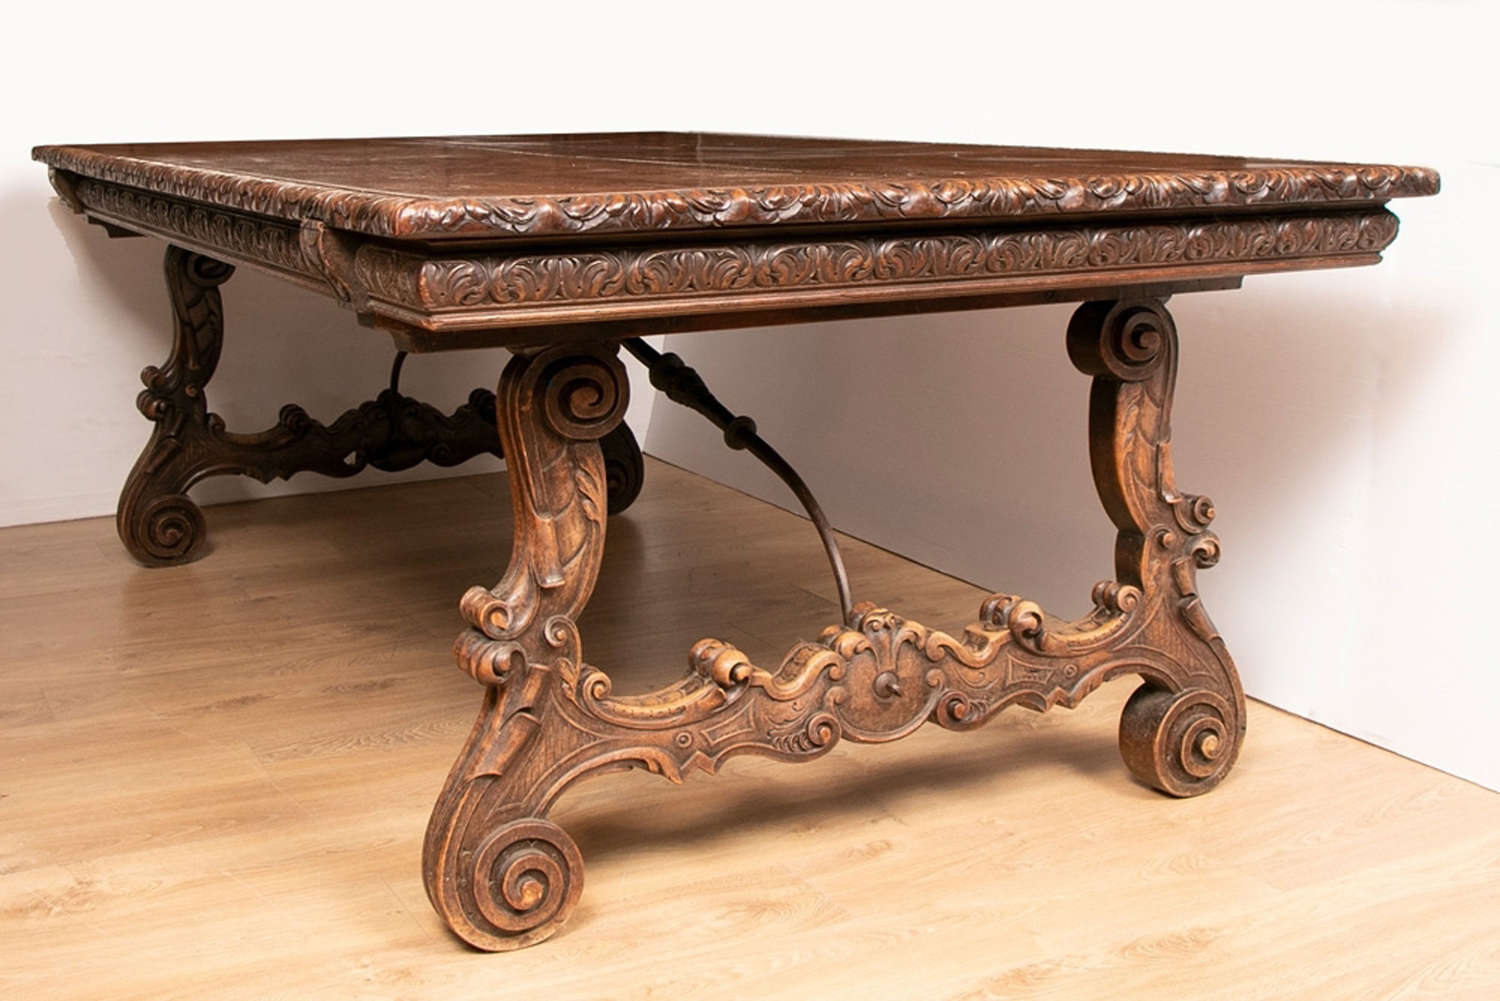 Antique Carved Walnut Baronial Table